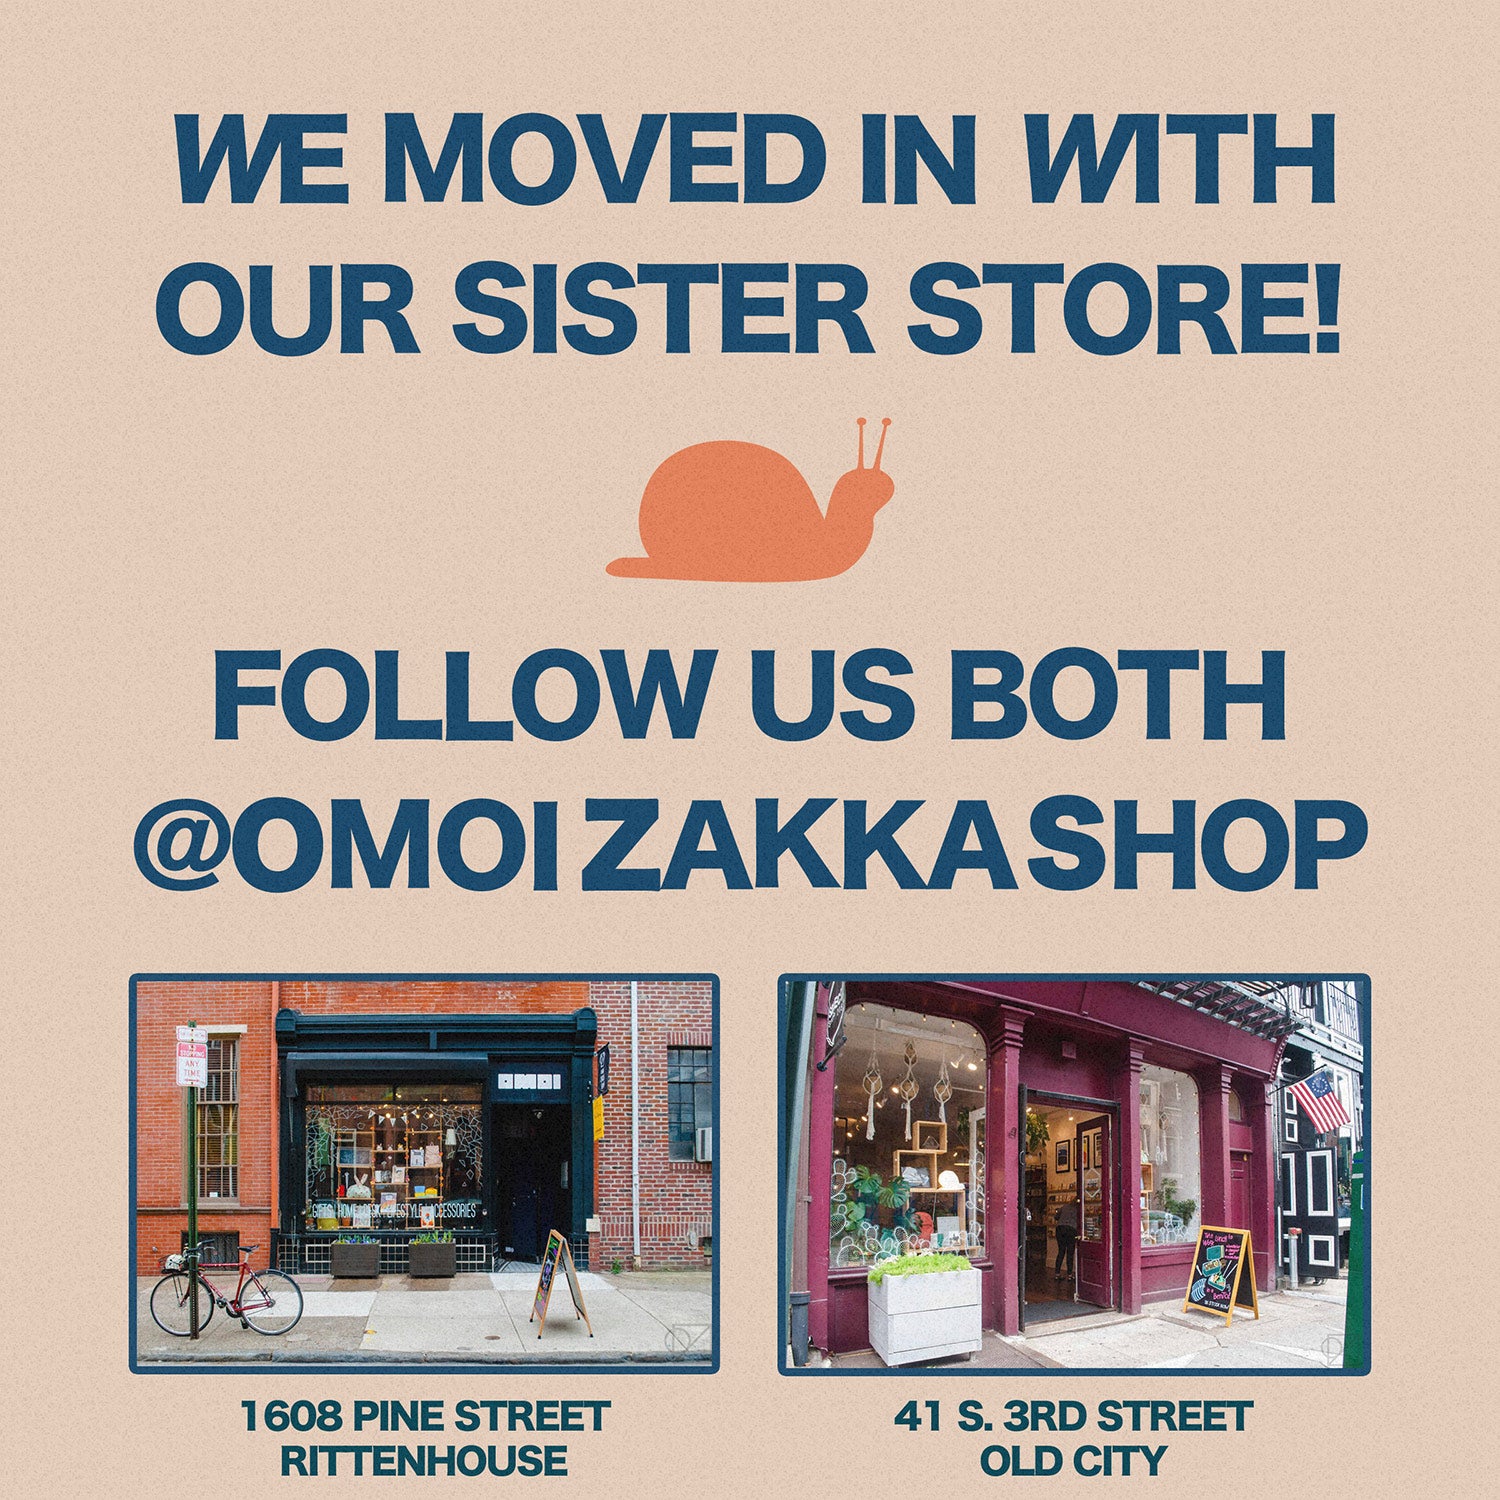 We had been running two separate Instagram accounts for both stores, which became too much work!